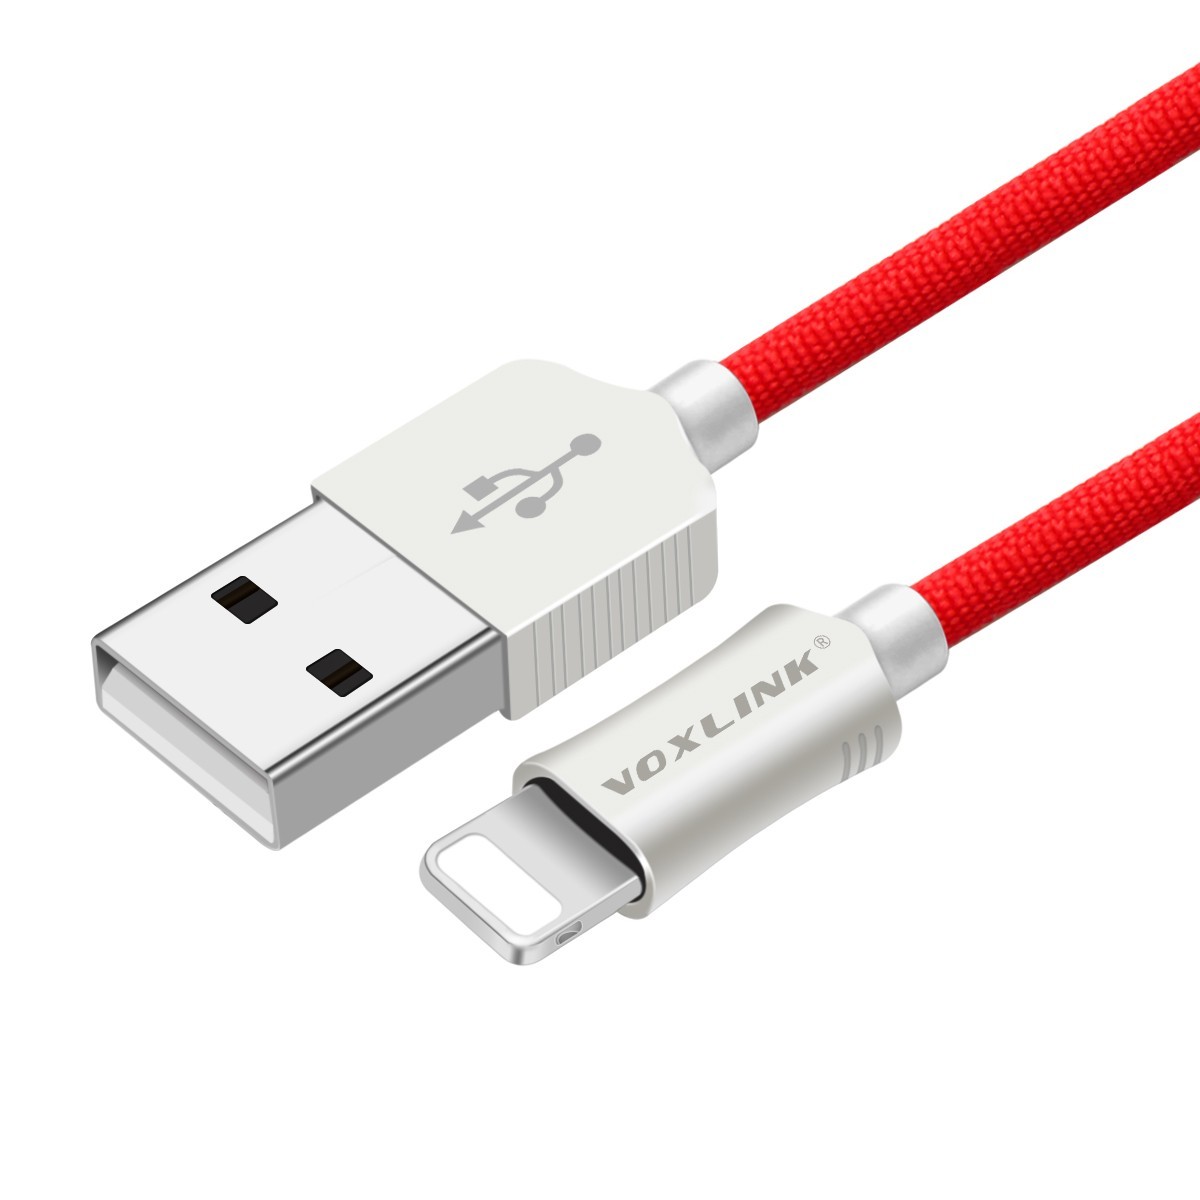 8 pin USB Cable for iPhone 7 Plus VOXLINK Cotton Braided Fast Charging USB Charger Data Cable for iPhone 8 6s Plus 5s iPad Pro red 1m